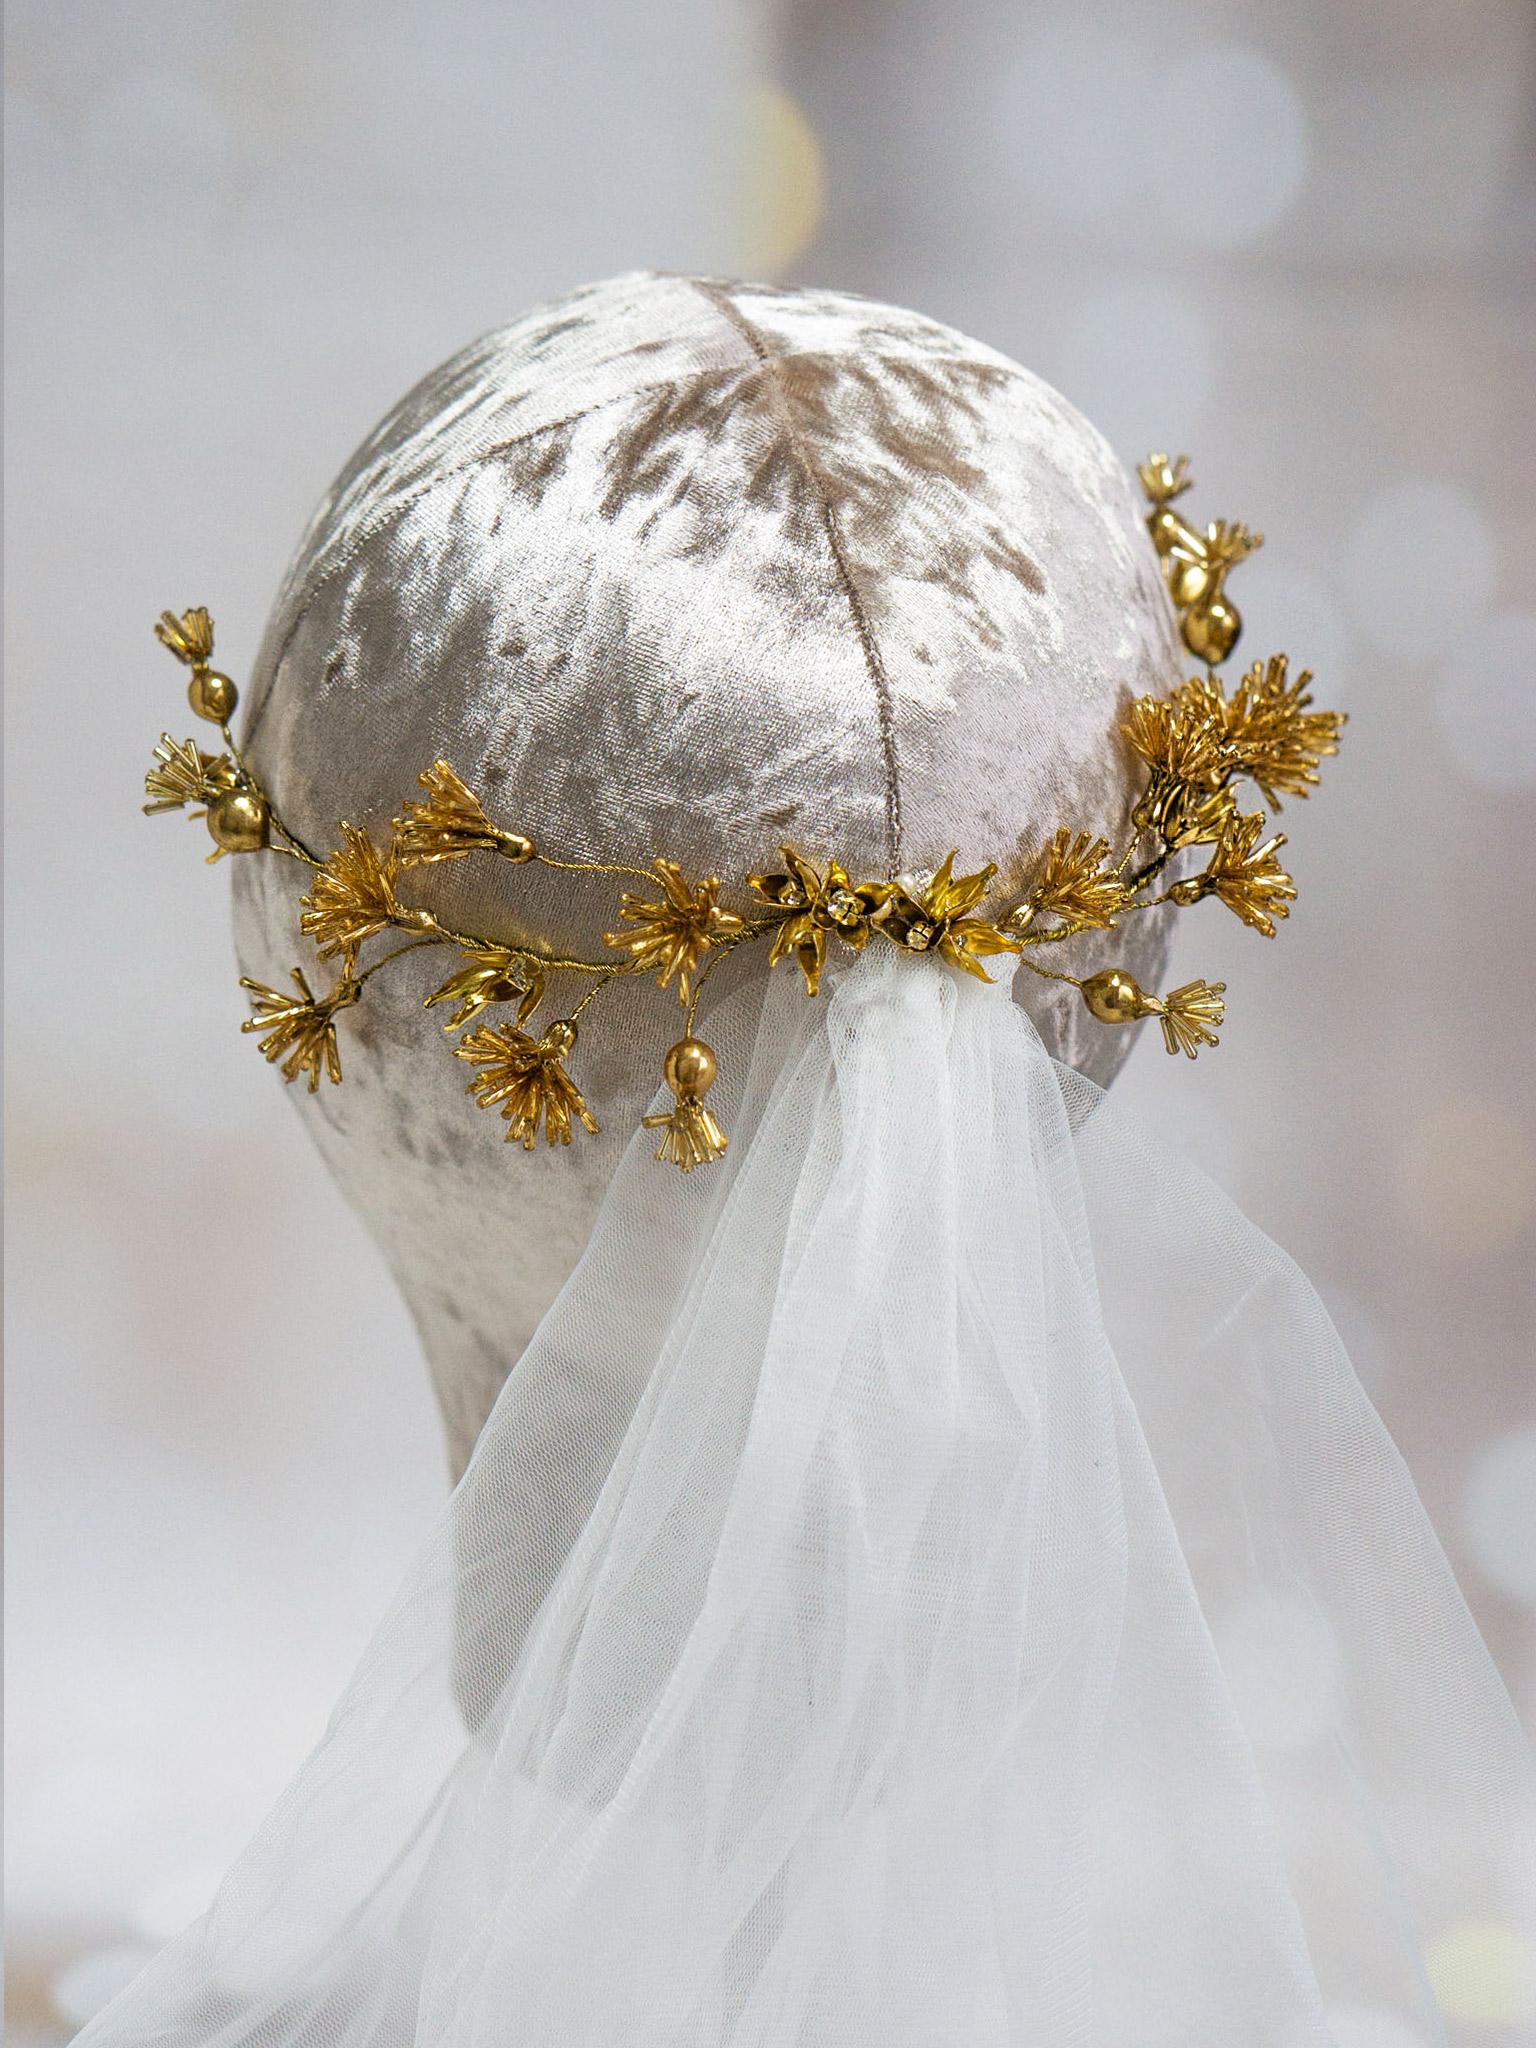 Enhance Your Bridal Look with These Flower Hair Vines